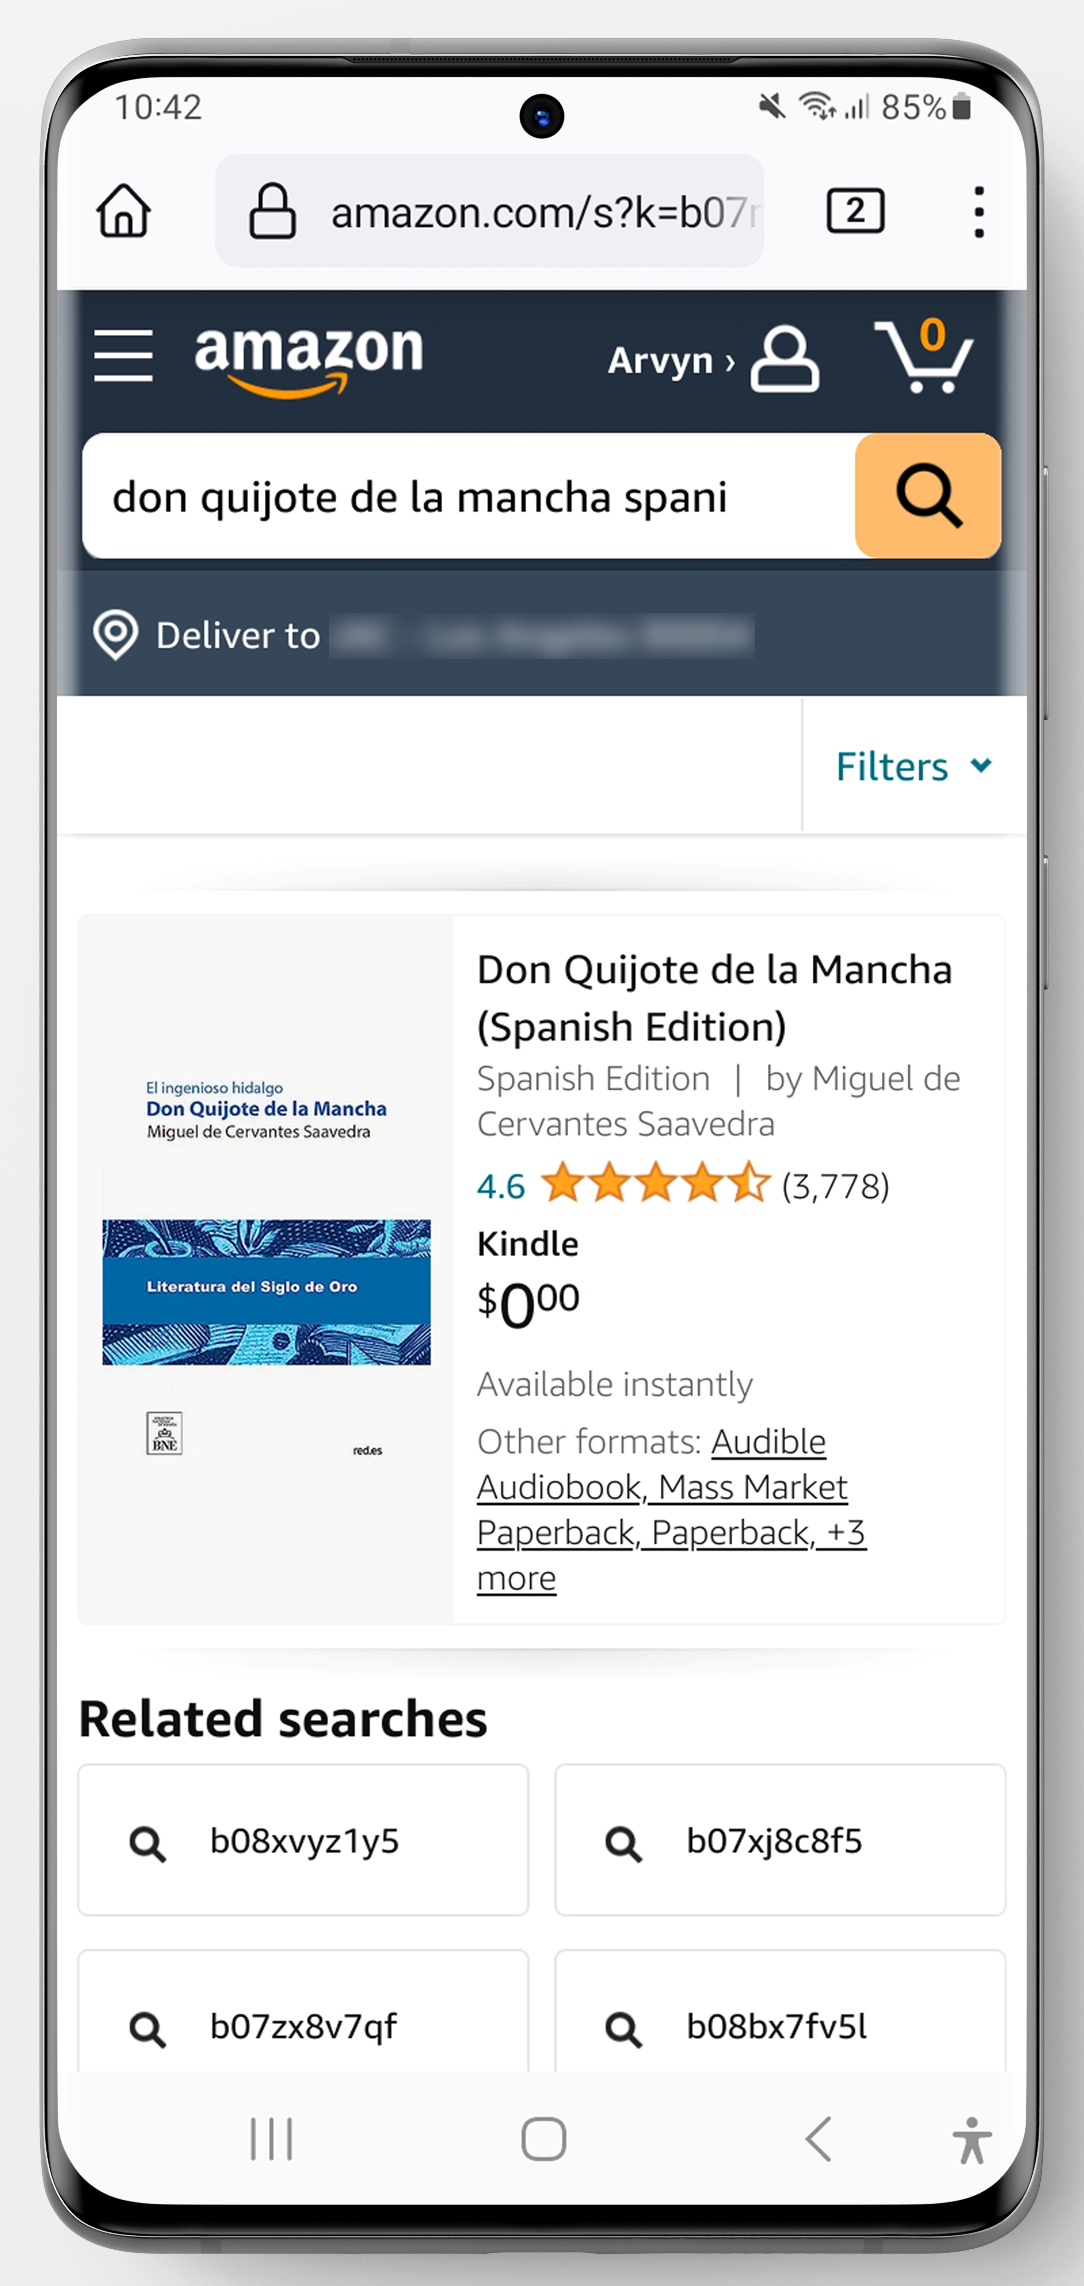 Amazon Kindle Store Search Results for Don Quijote in Spanish on Android